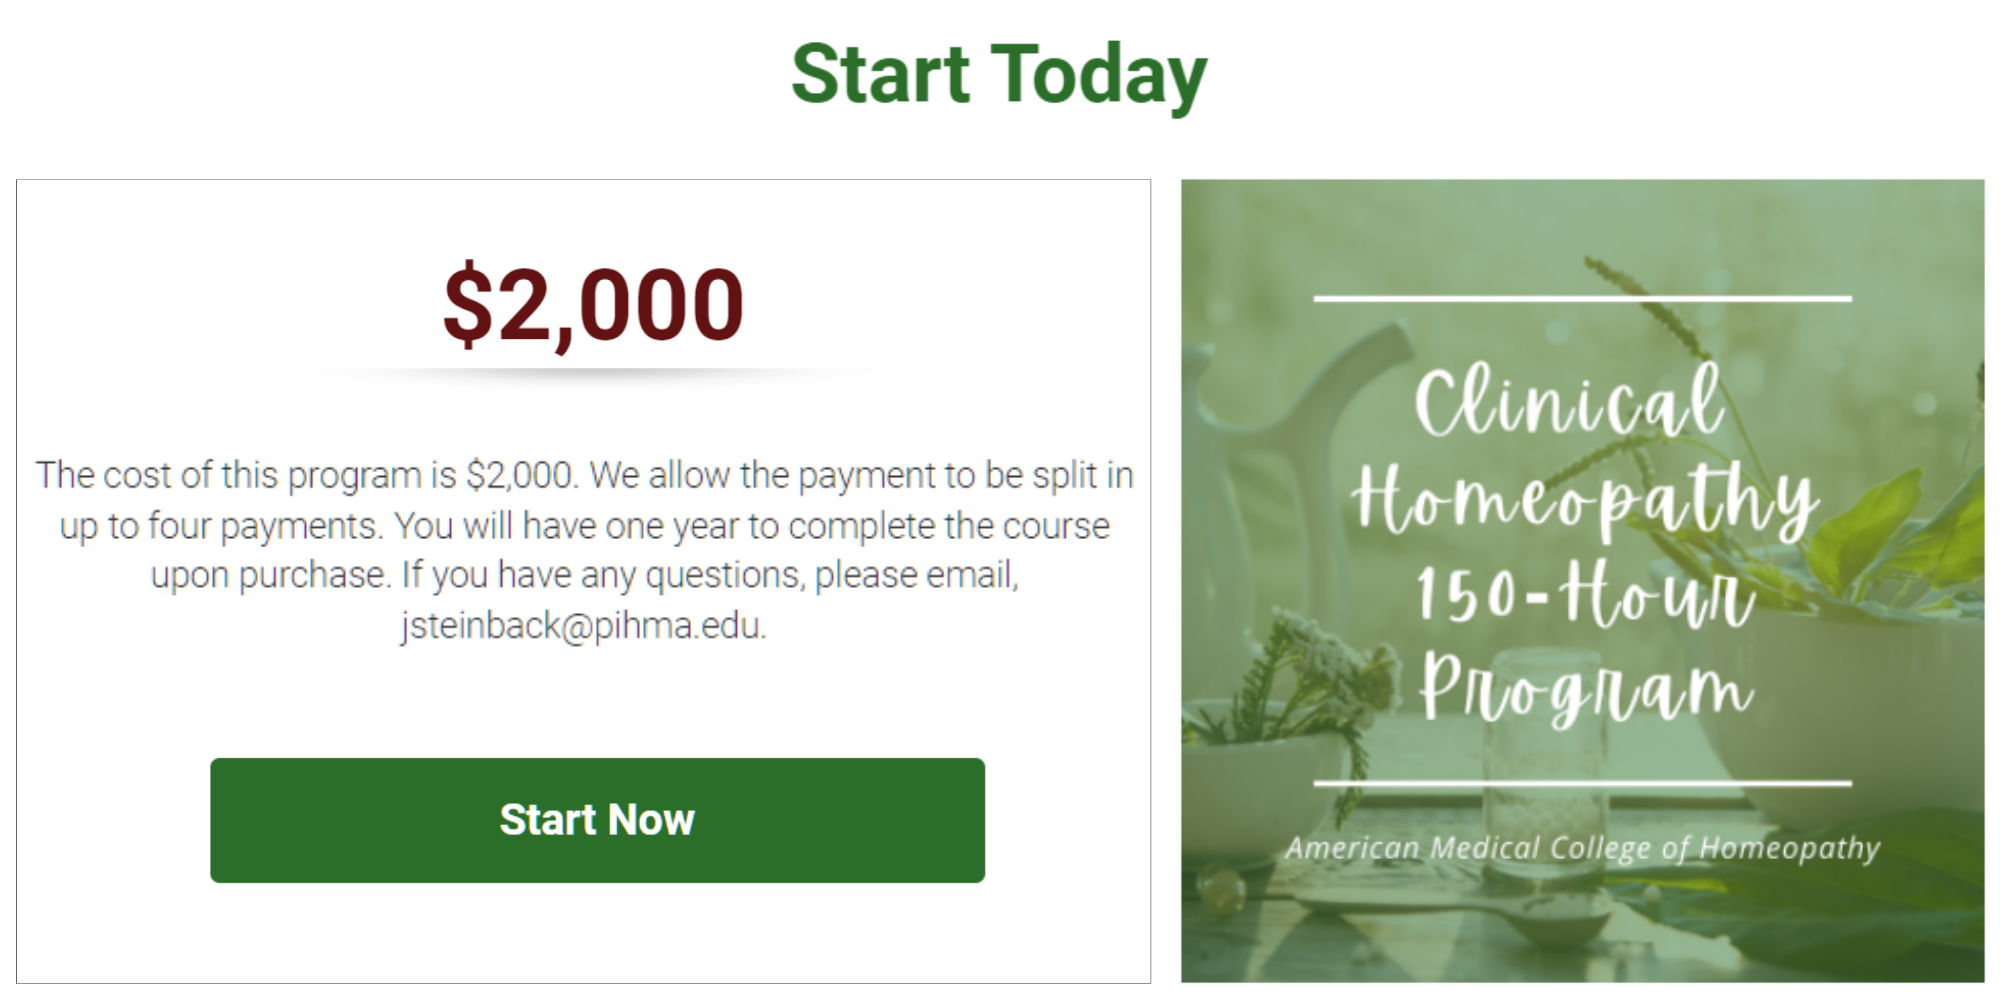 Start today: $2,000 fee can be split in up to 4 payments if you email the contact; must complete within a year.